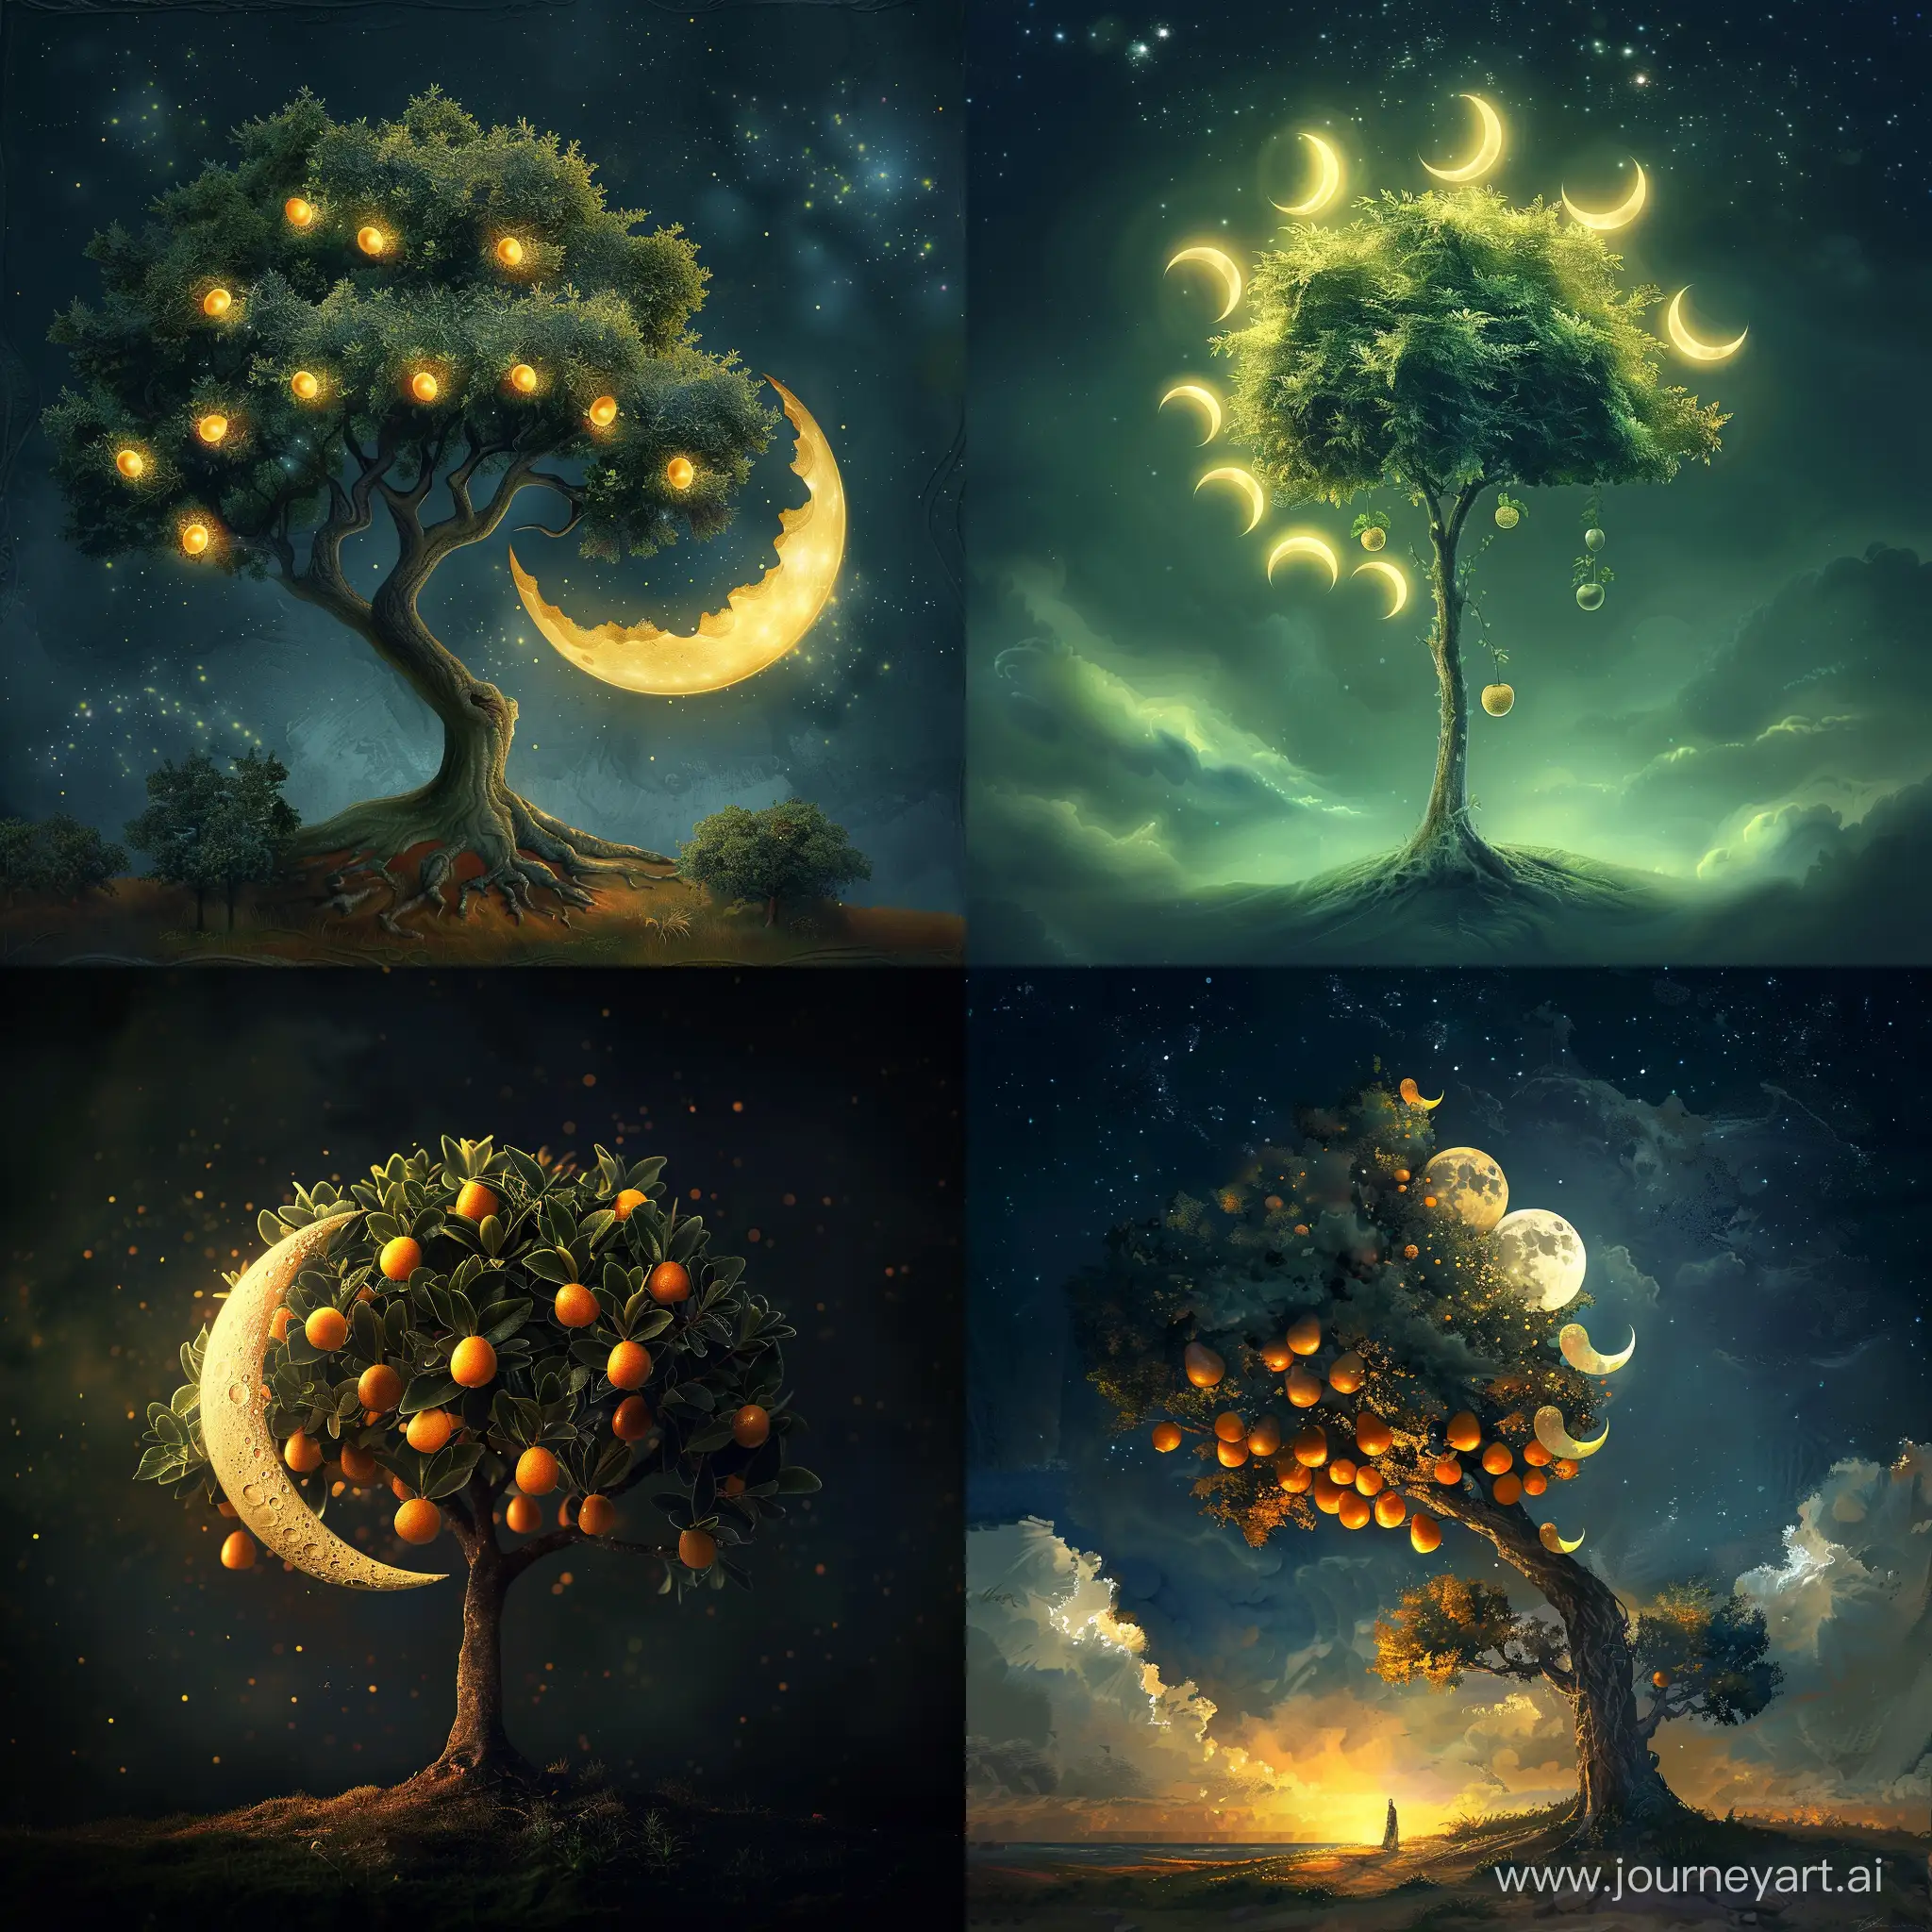 A fantasy magic tree that grows fruit in the shape of the moon, they can be like a full moon, or like a crescent moon